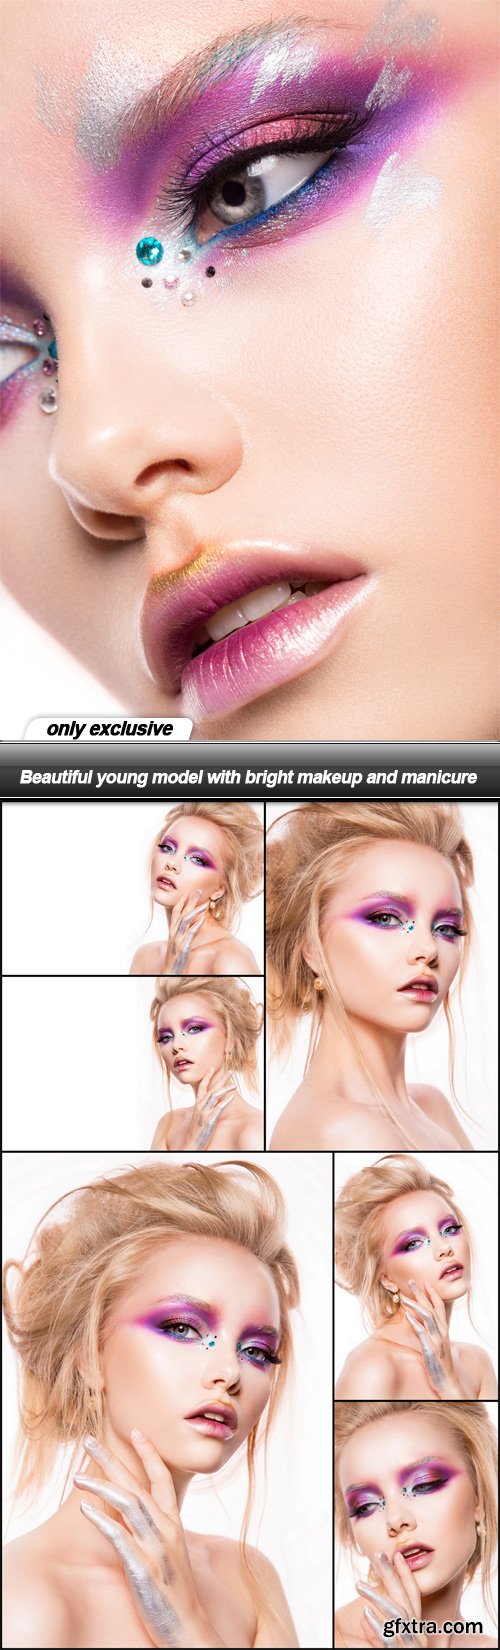 Beautiful young model with bright makeup and manicure - 7 UHQ JPEG